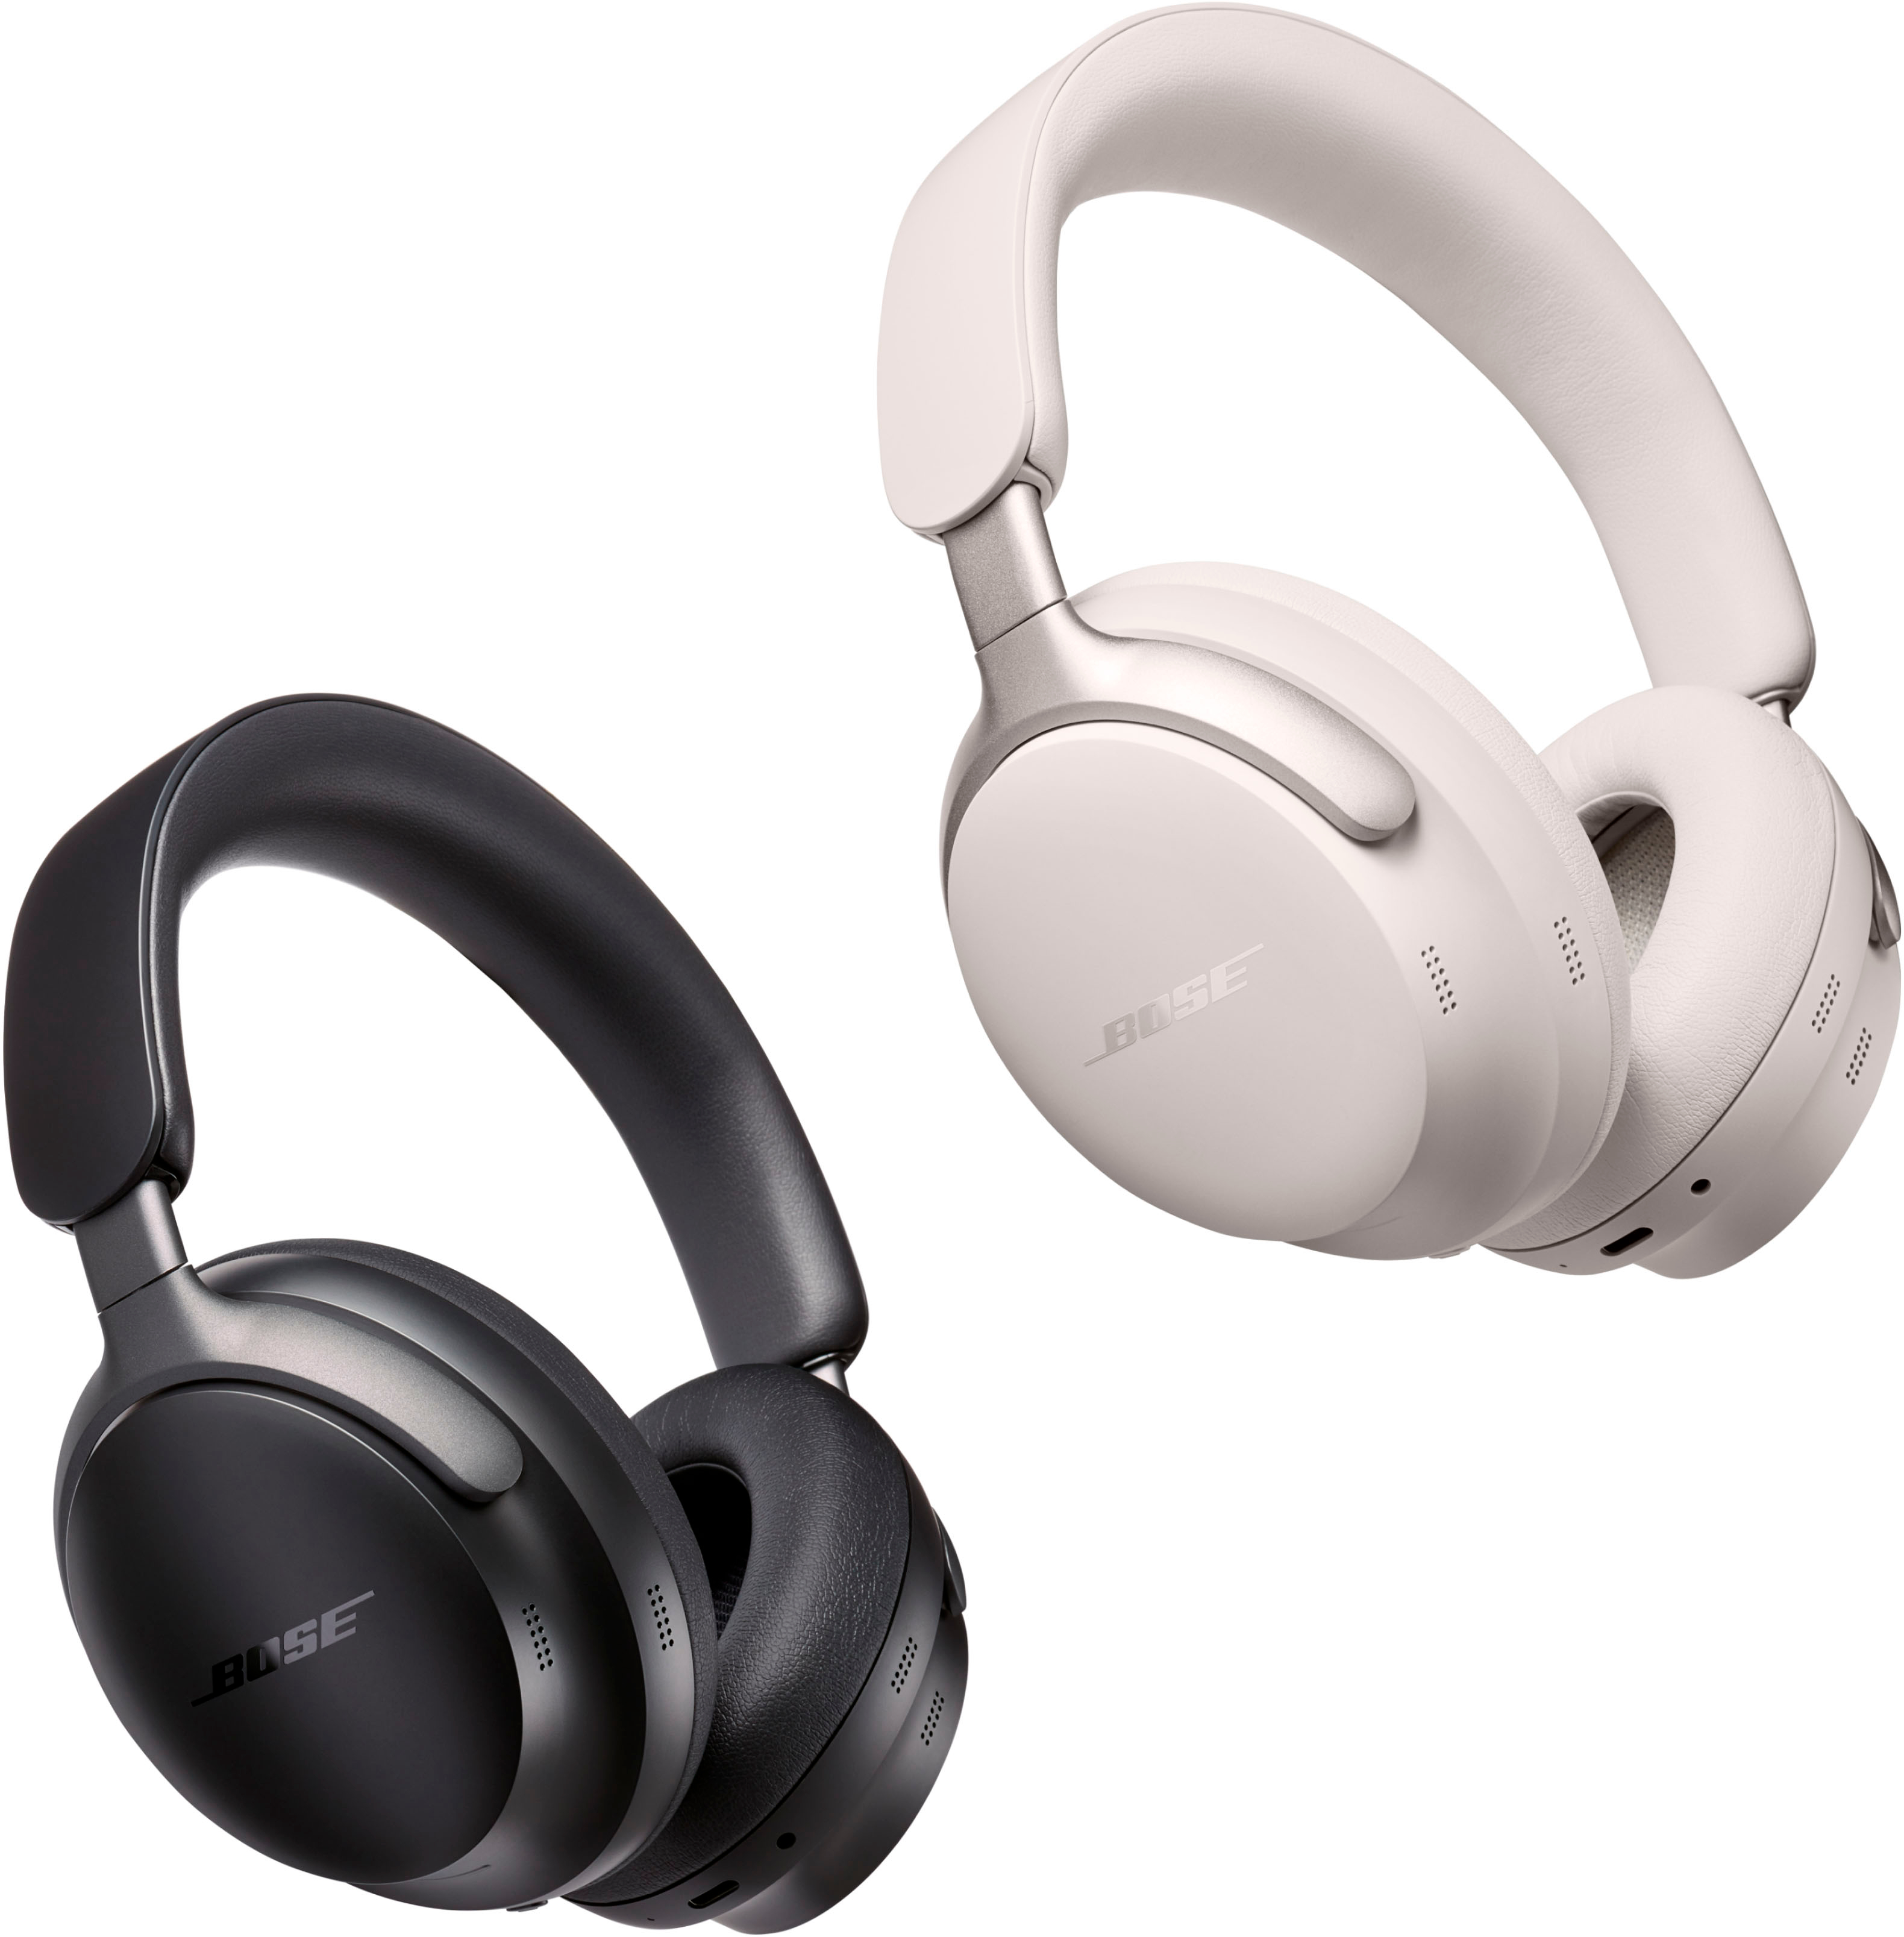 Bose QuietComfort Ultra vs QuietComfort: What's the difference?